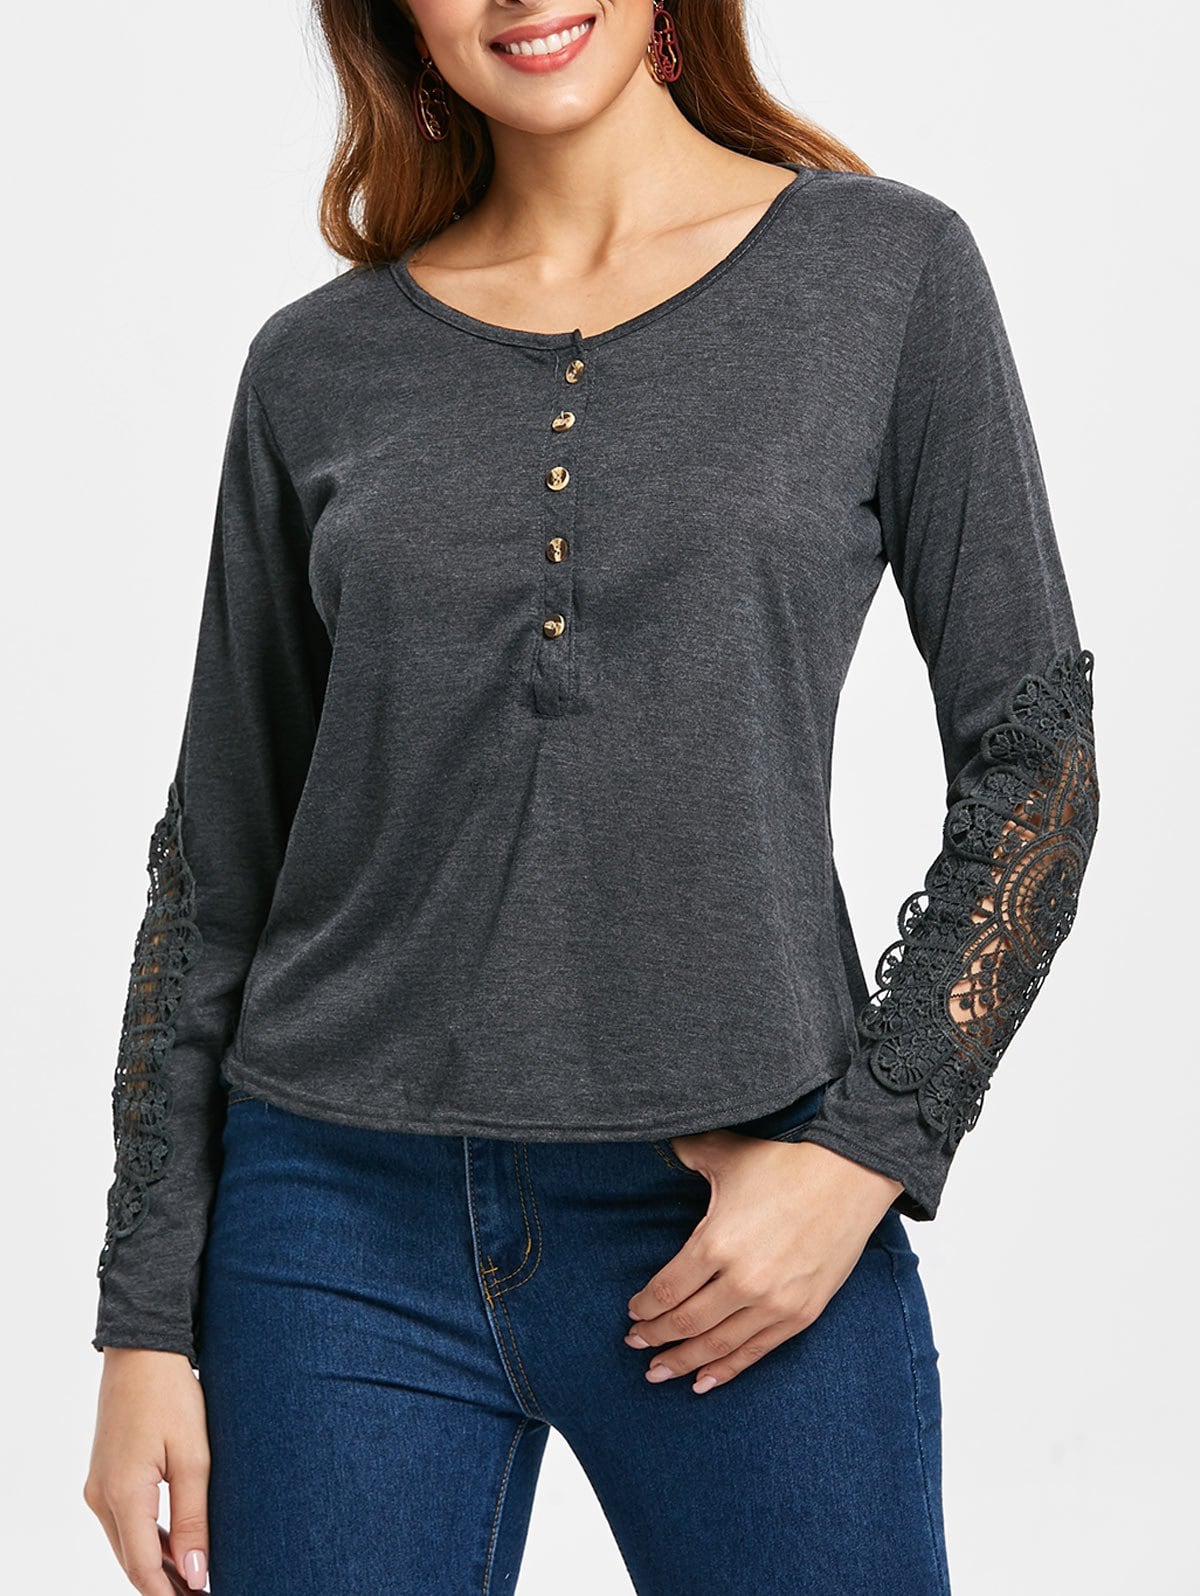 Casual Lace Splicing Scoop Neck Long Sleeve T-Shirt For Women